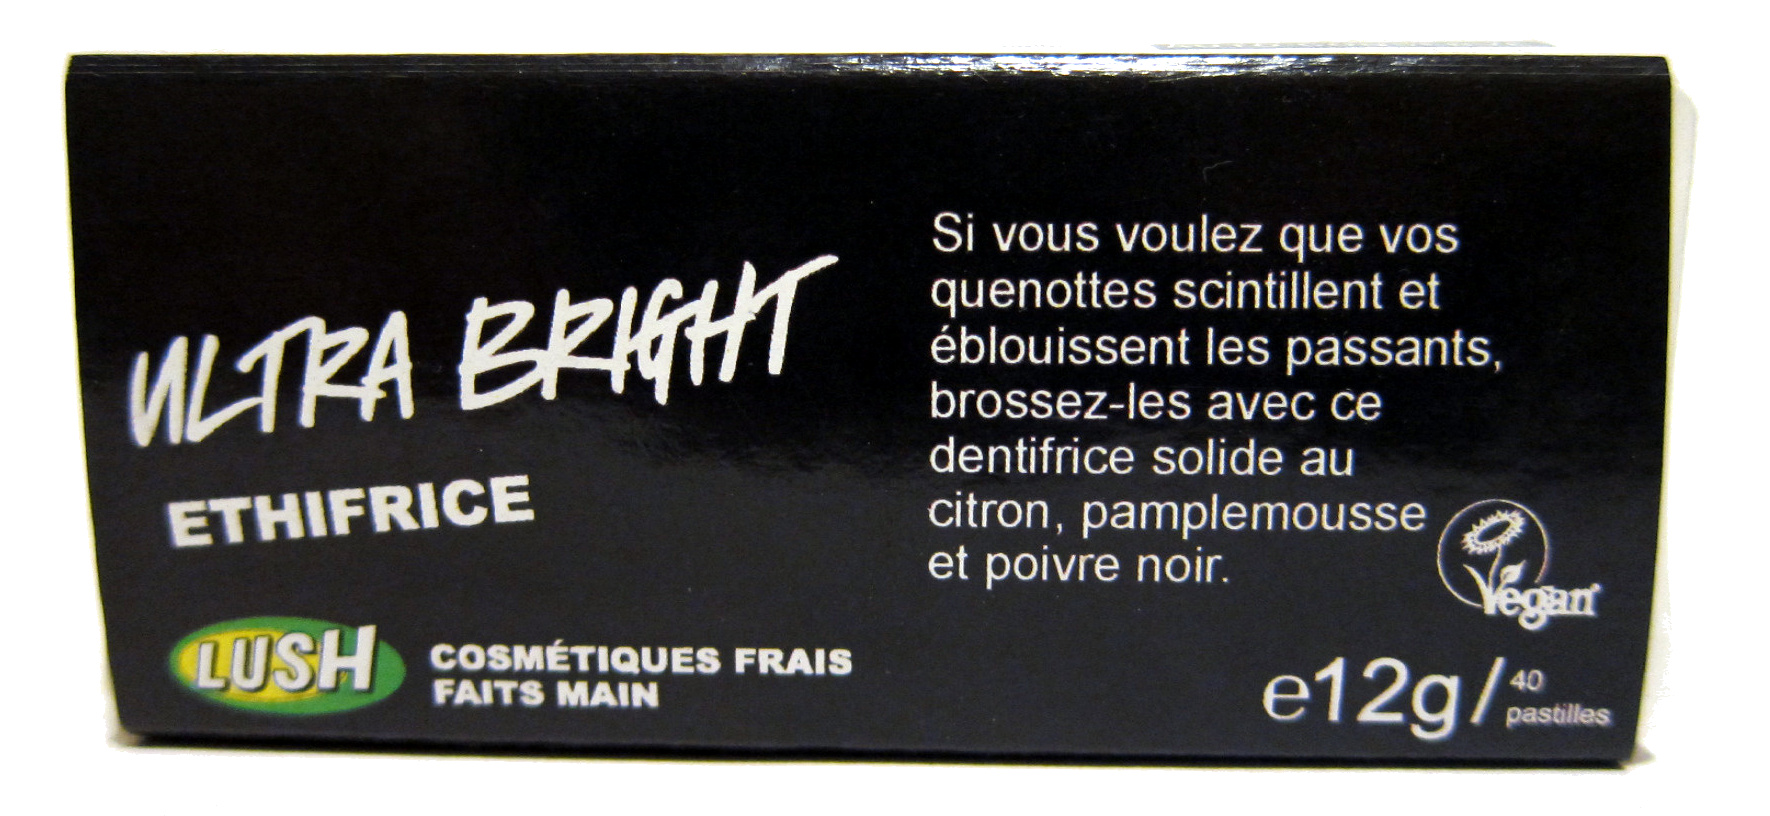 Ethifrice Ultra Bright - Product - fr